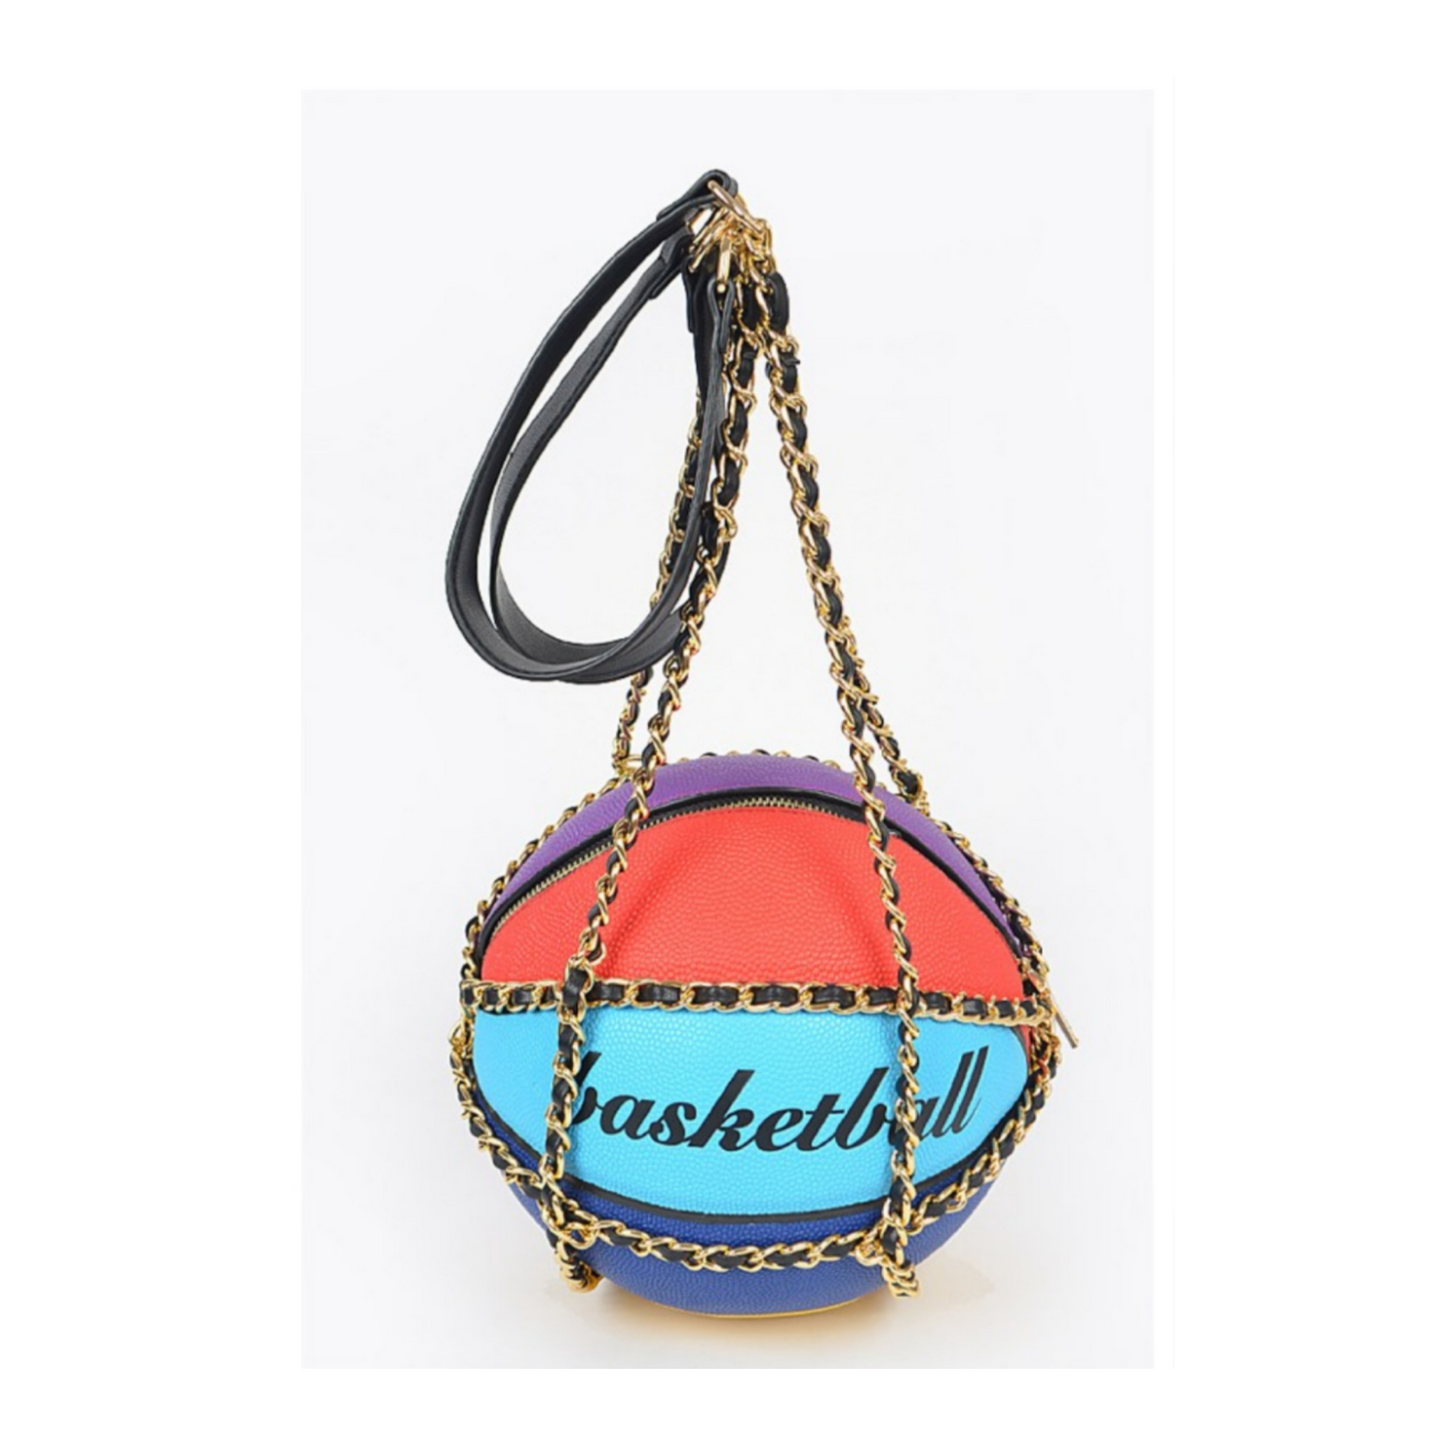 *PREORDER* Multicolored Basketball Purse with Chain Straps (Ships by 01/15)